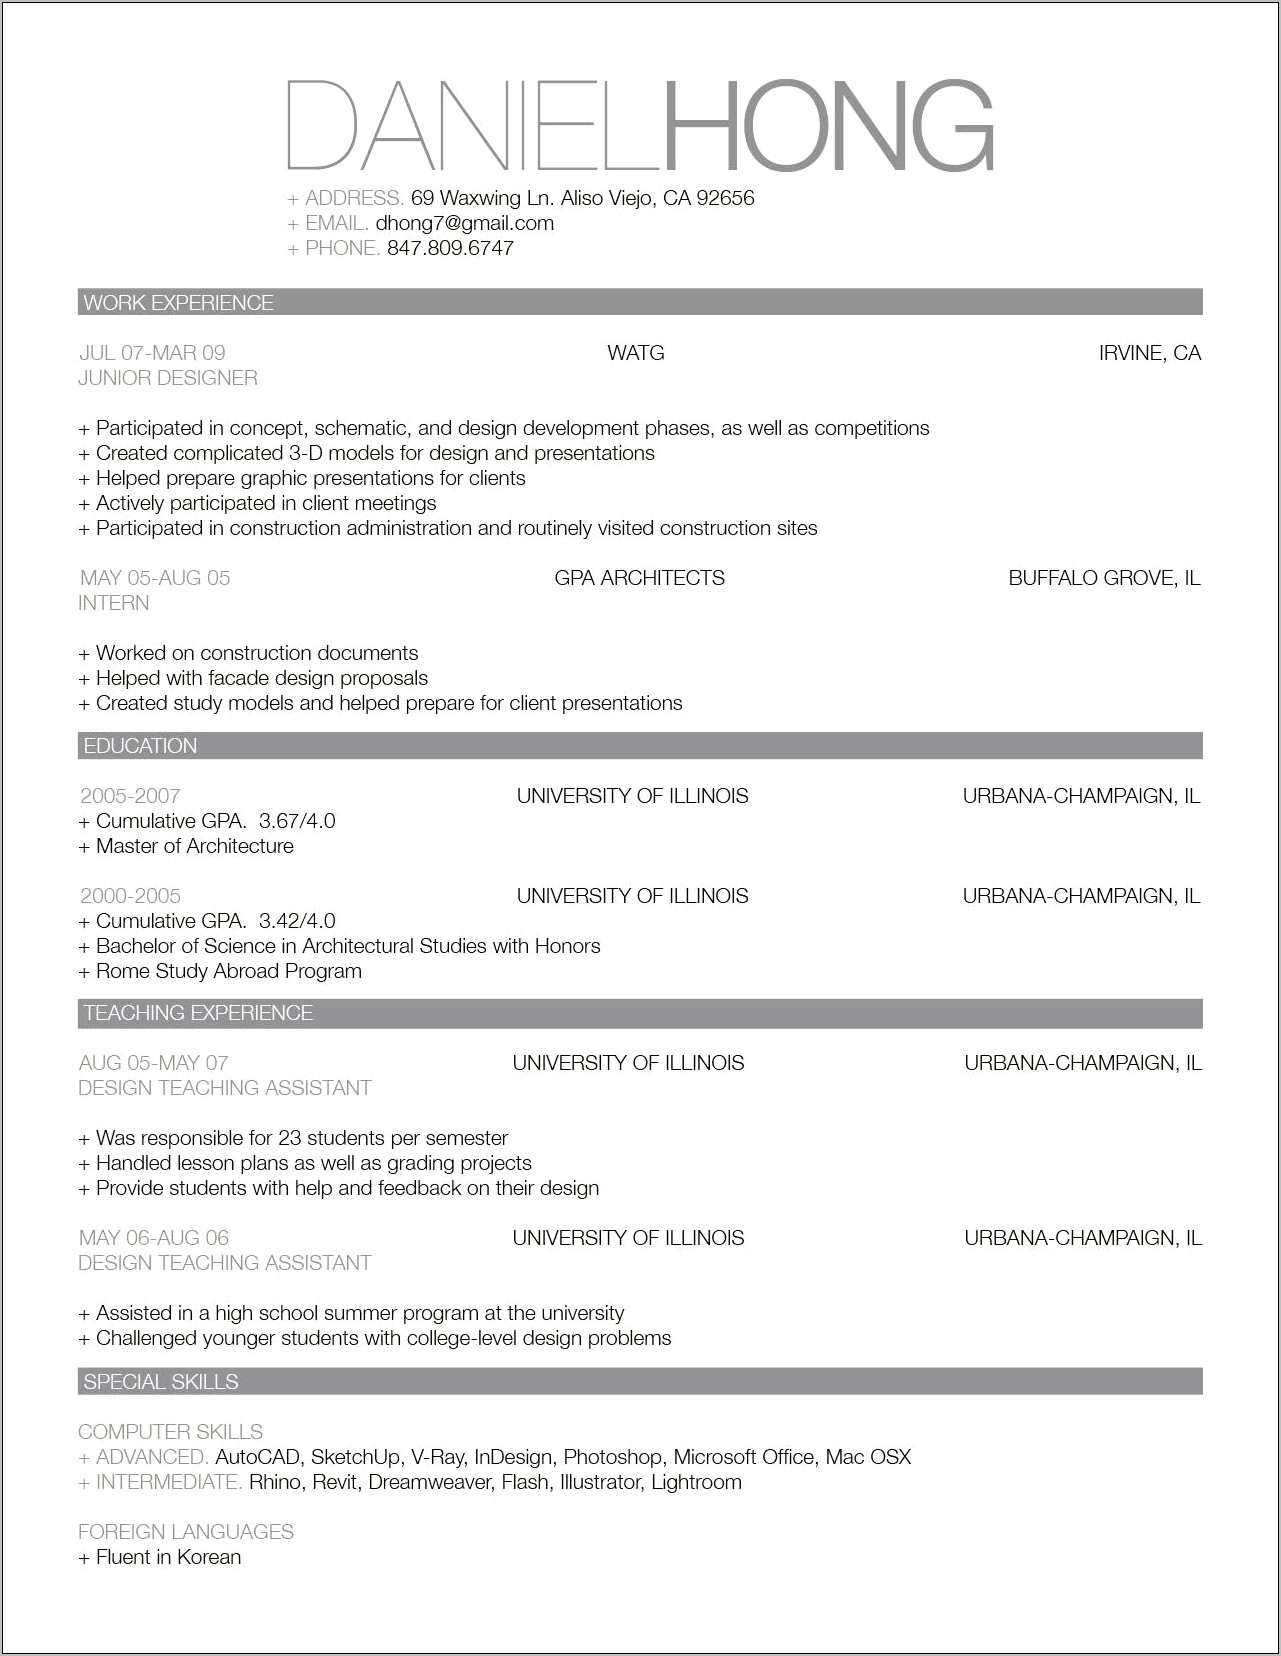 Samples Of Professional Resumes Free